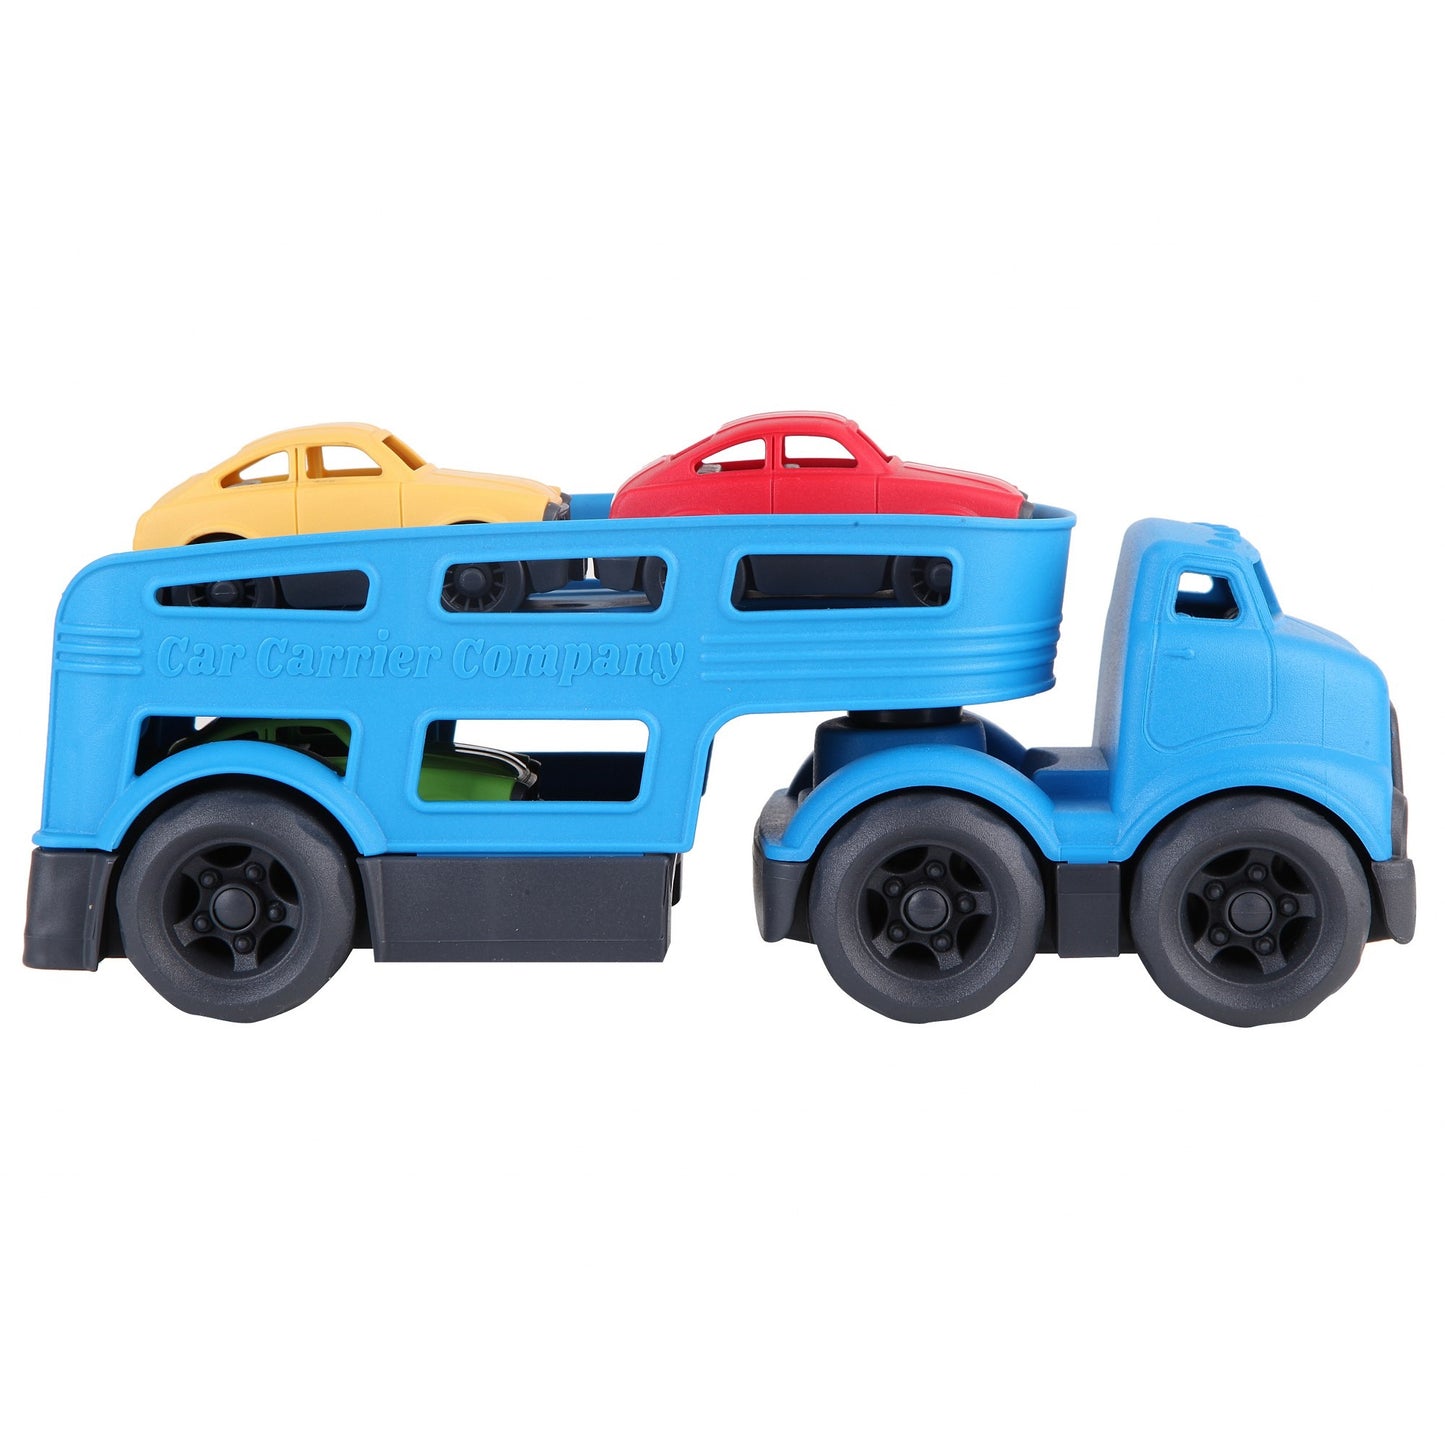 Blue Car Carrier with 3 Colored Cars